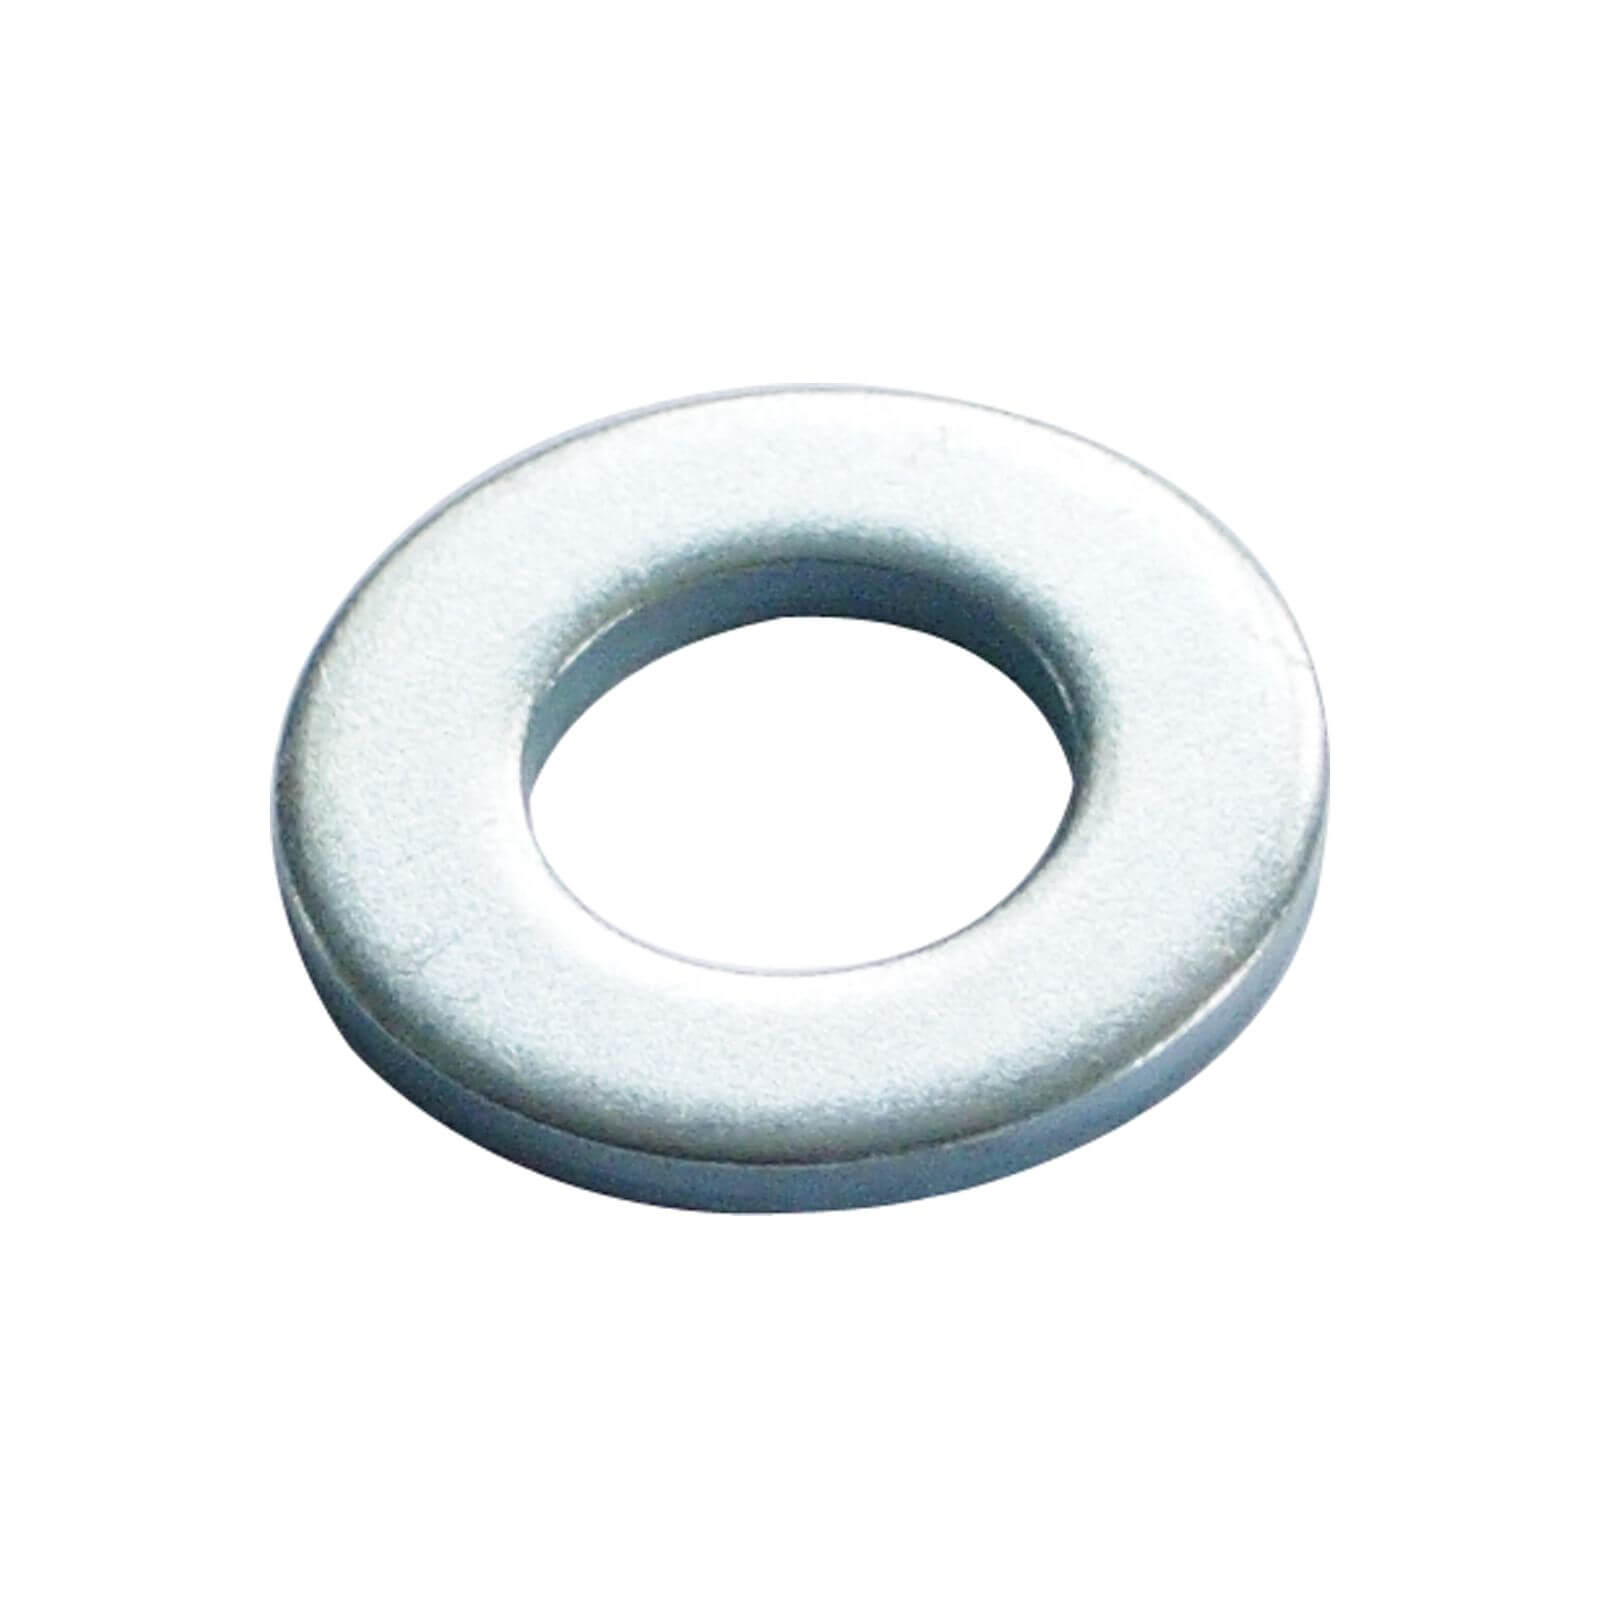 Washer - Bright Zinc Plated - M6 - 50 Pack